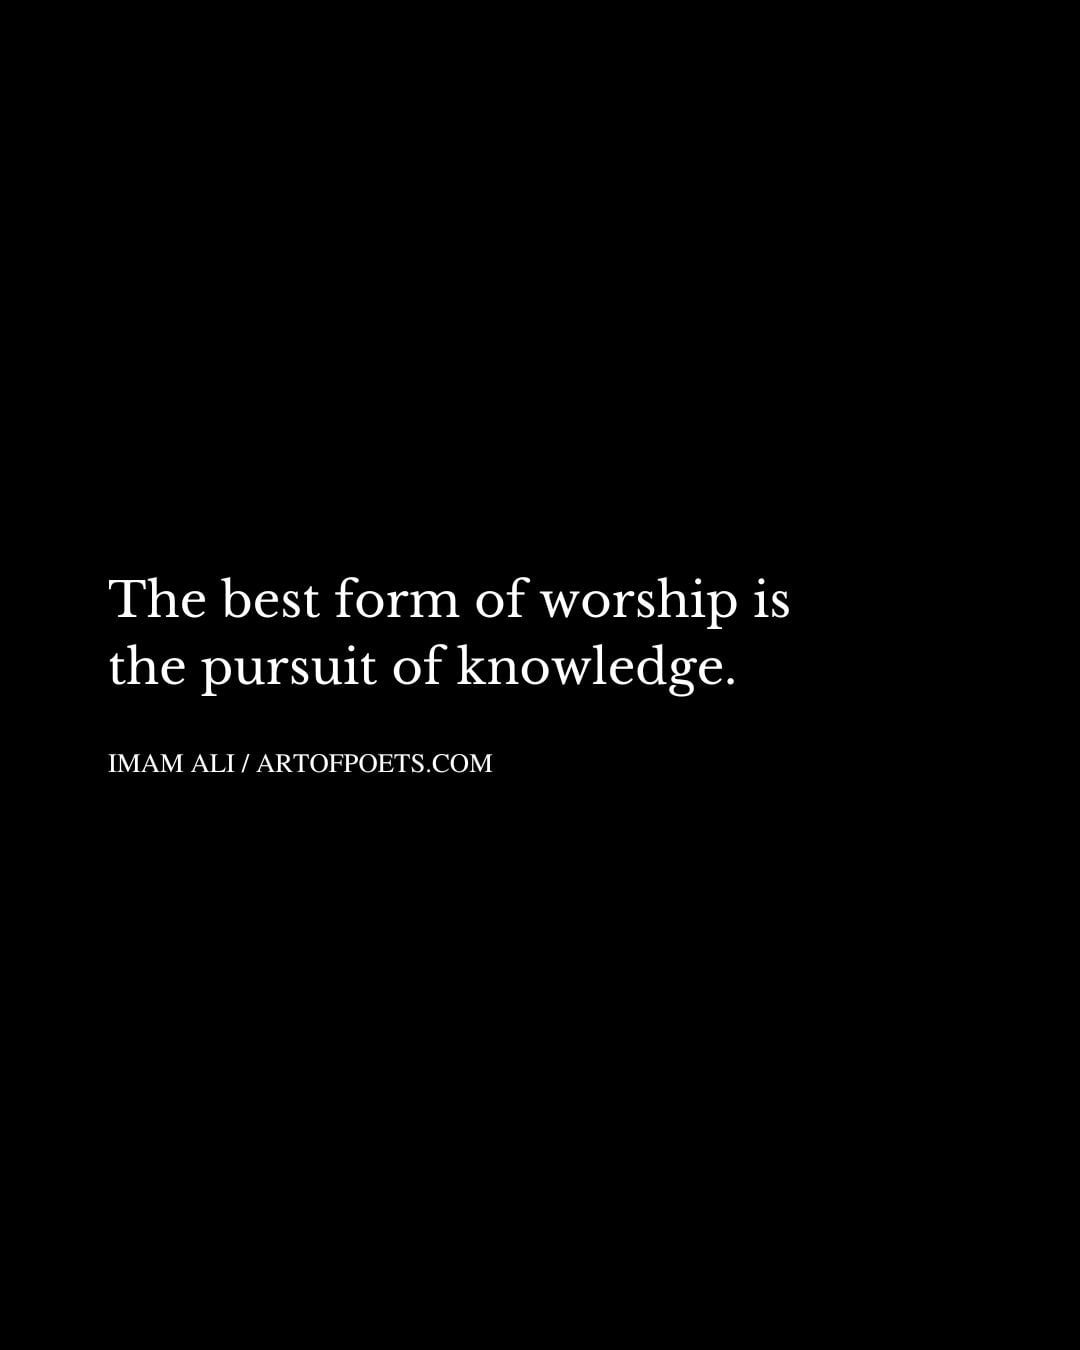 The best form of worship is the pursuit of knowledge